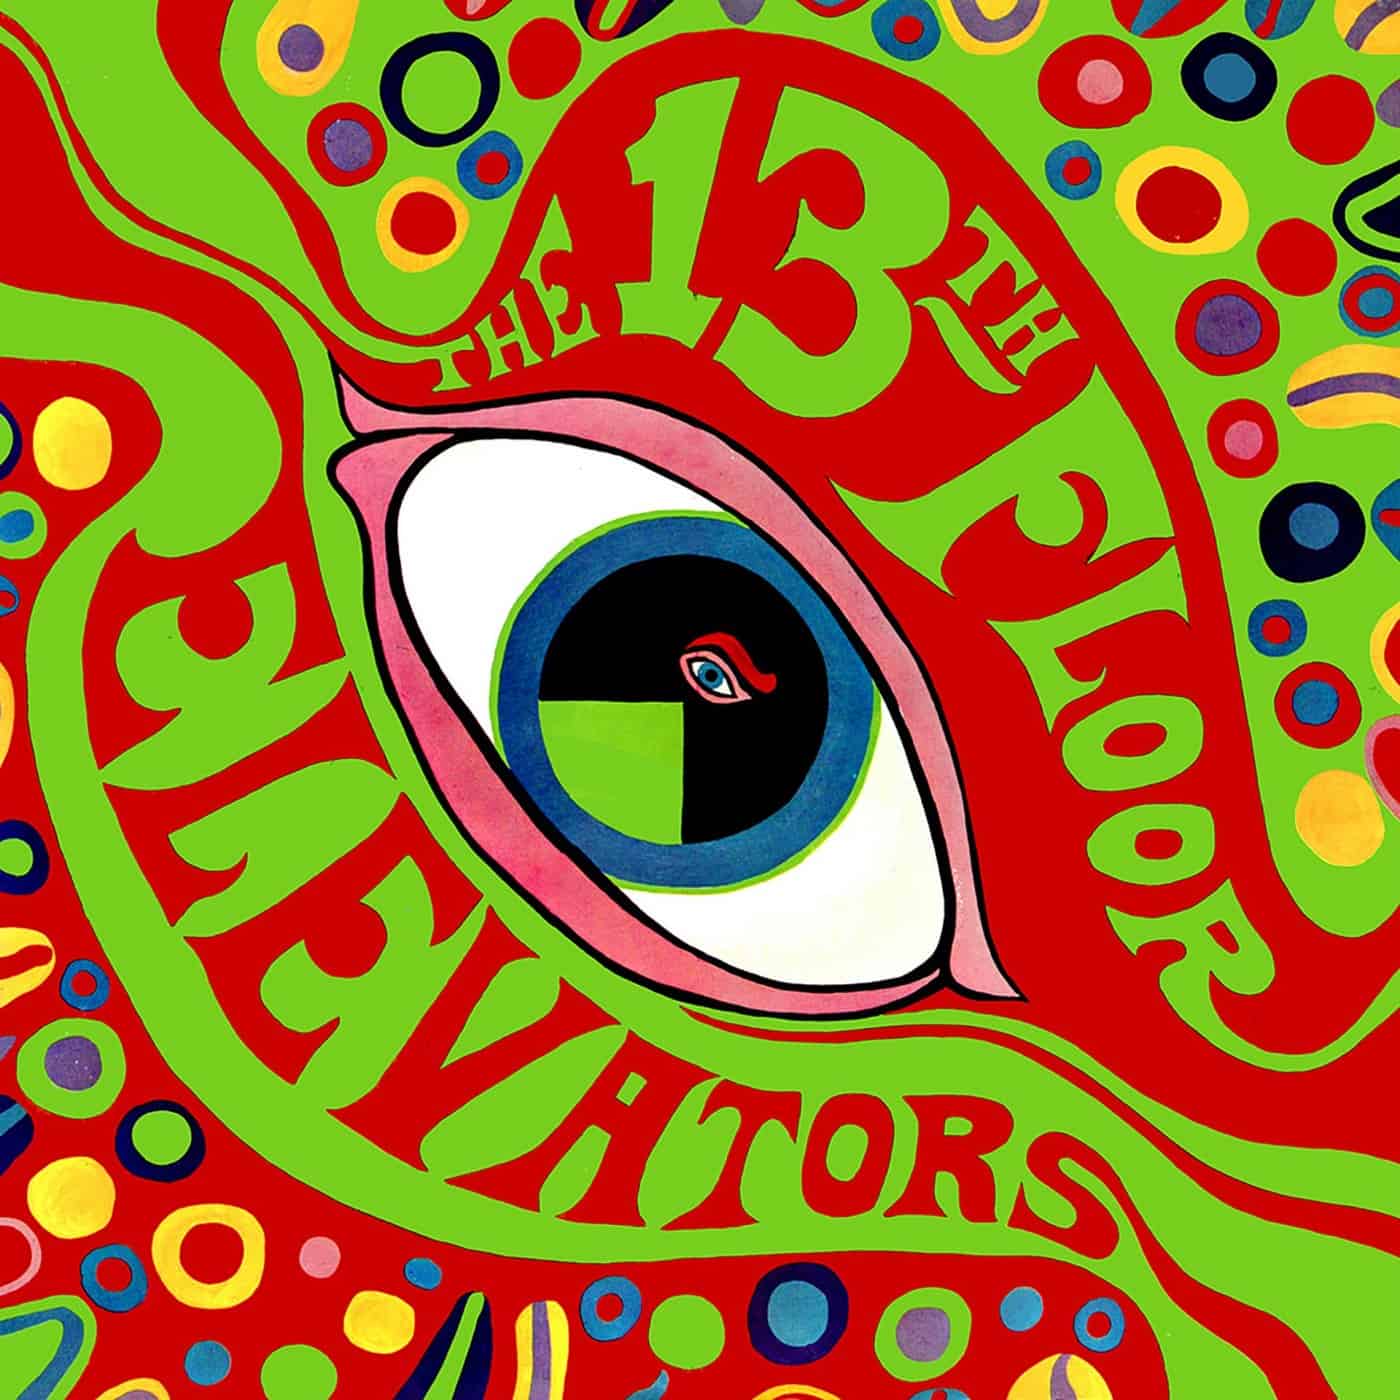  The 13th Floor Elevators The Psychedelic Sounds of the 13th Floor Elevators